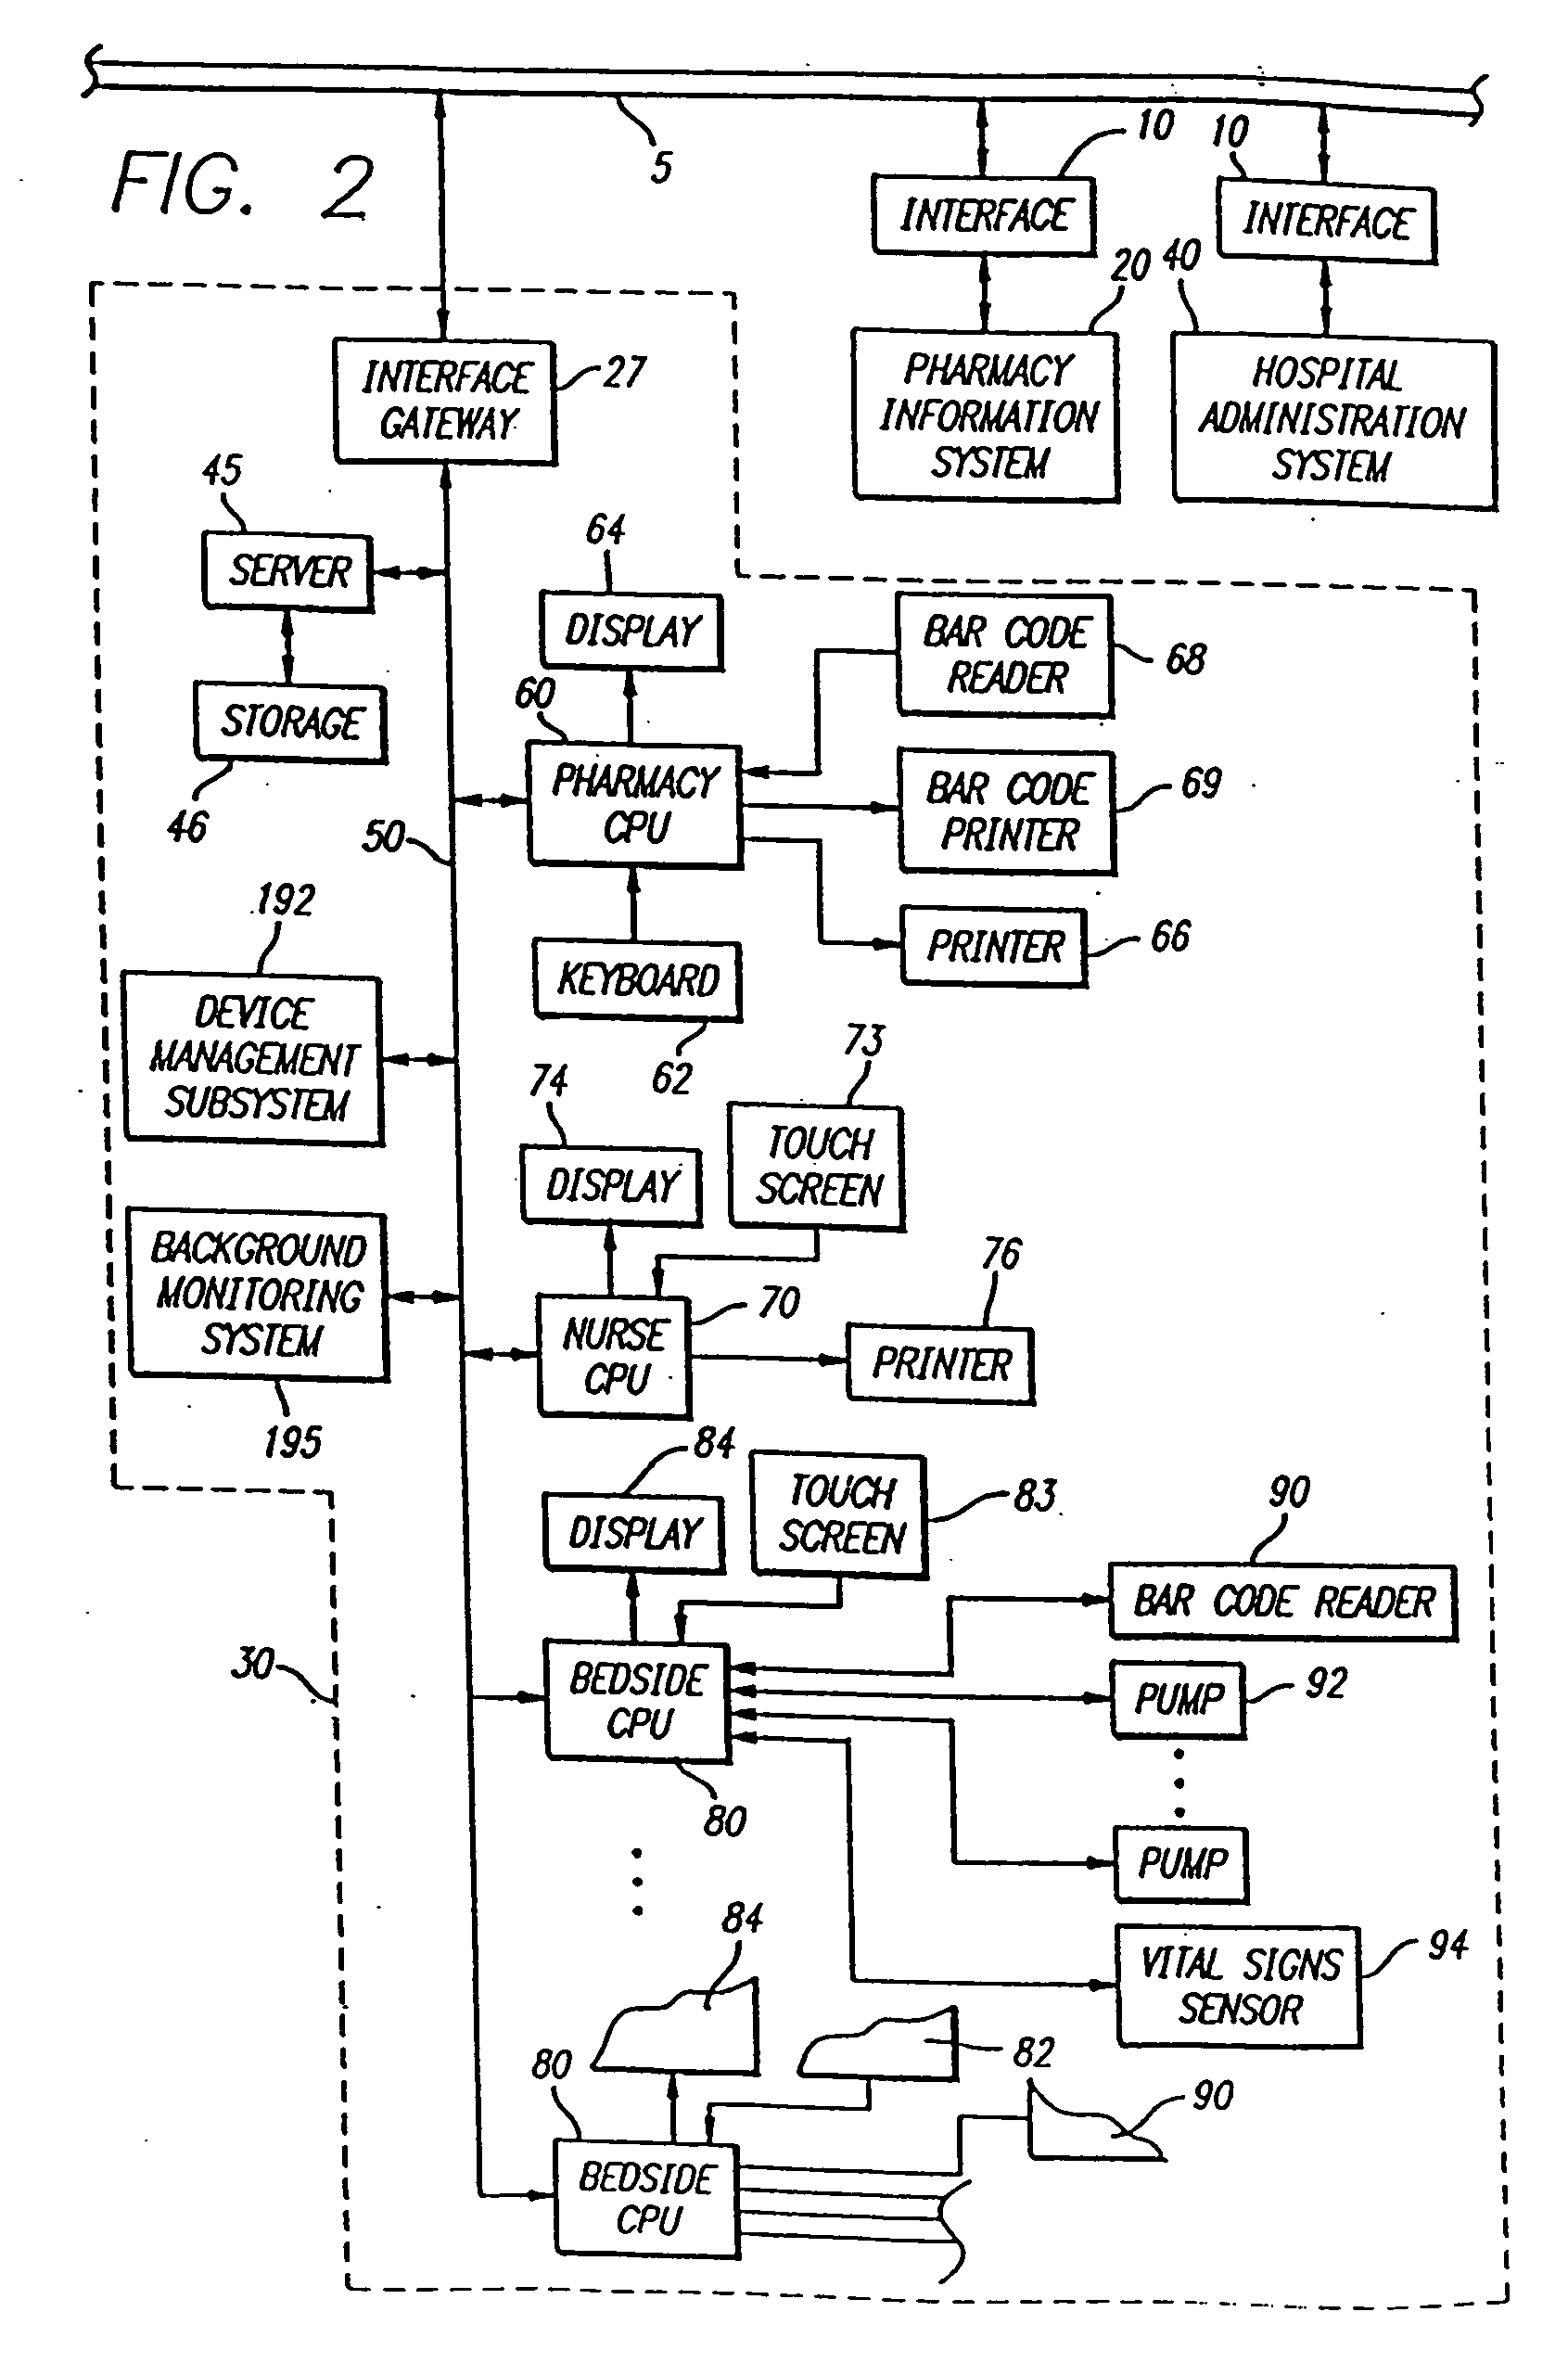 System and method for programming a clinical device